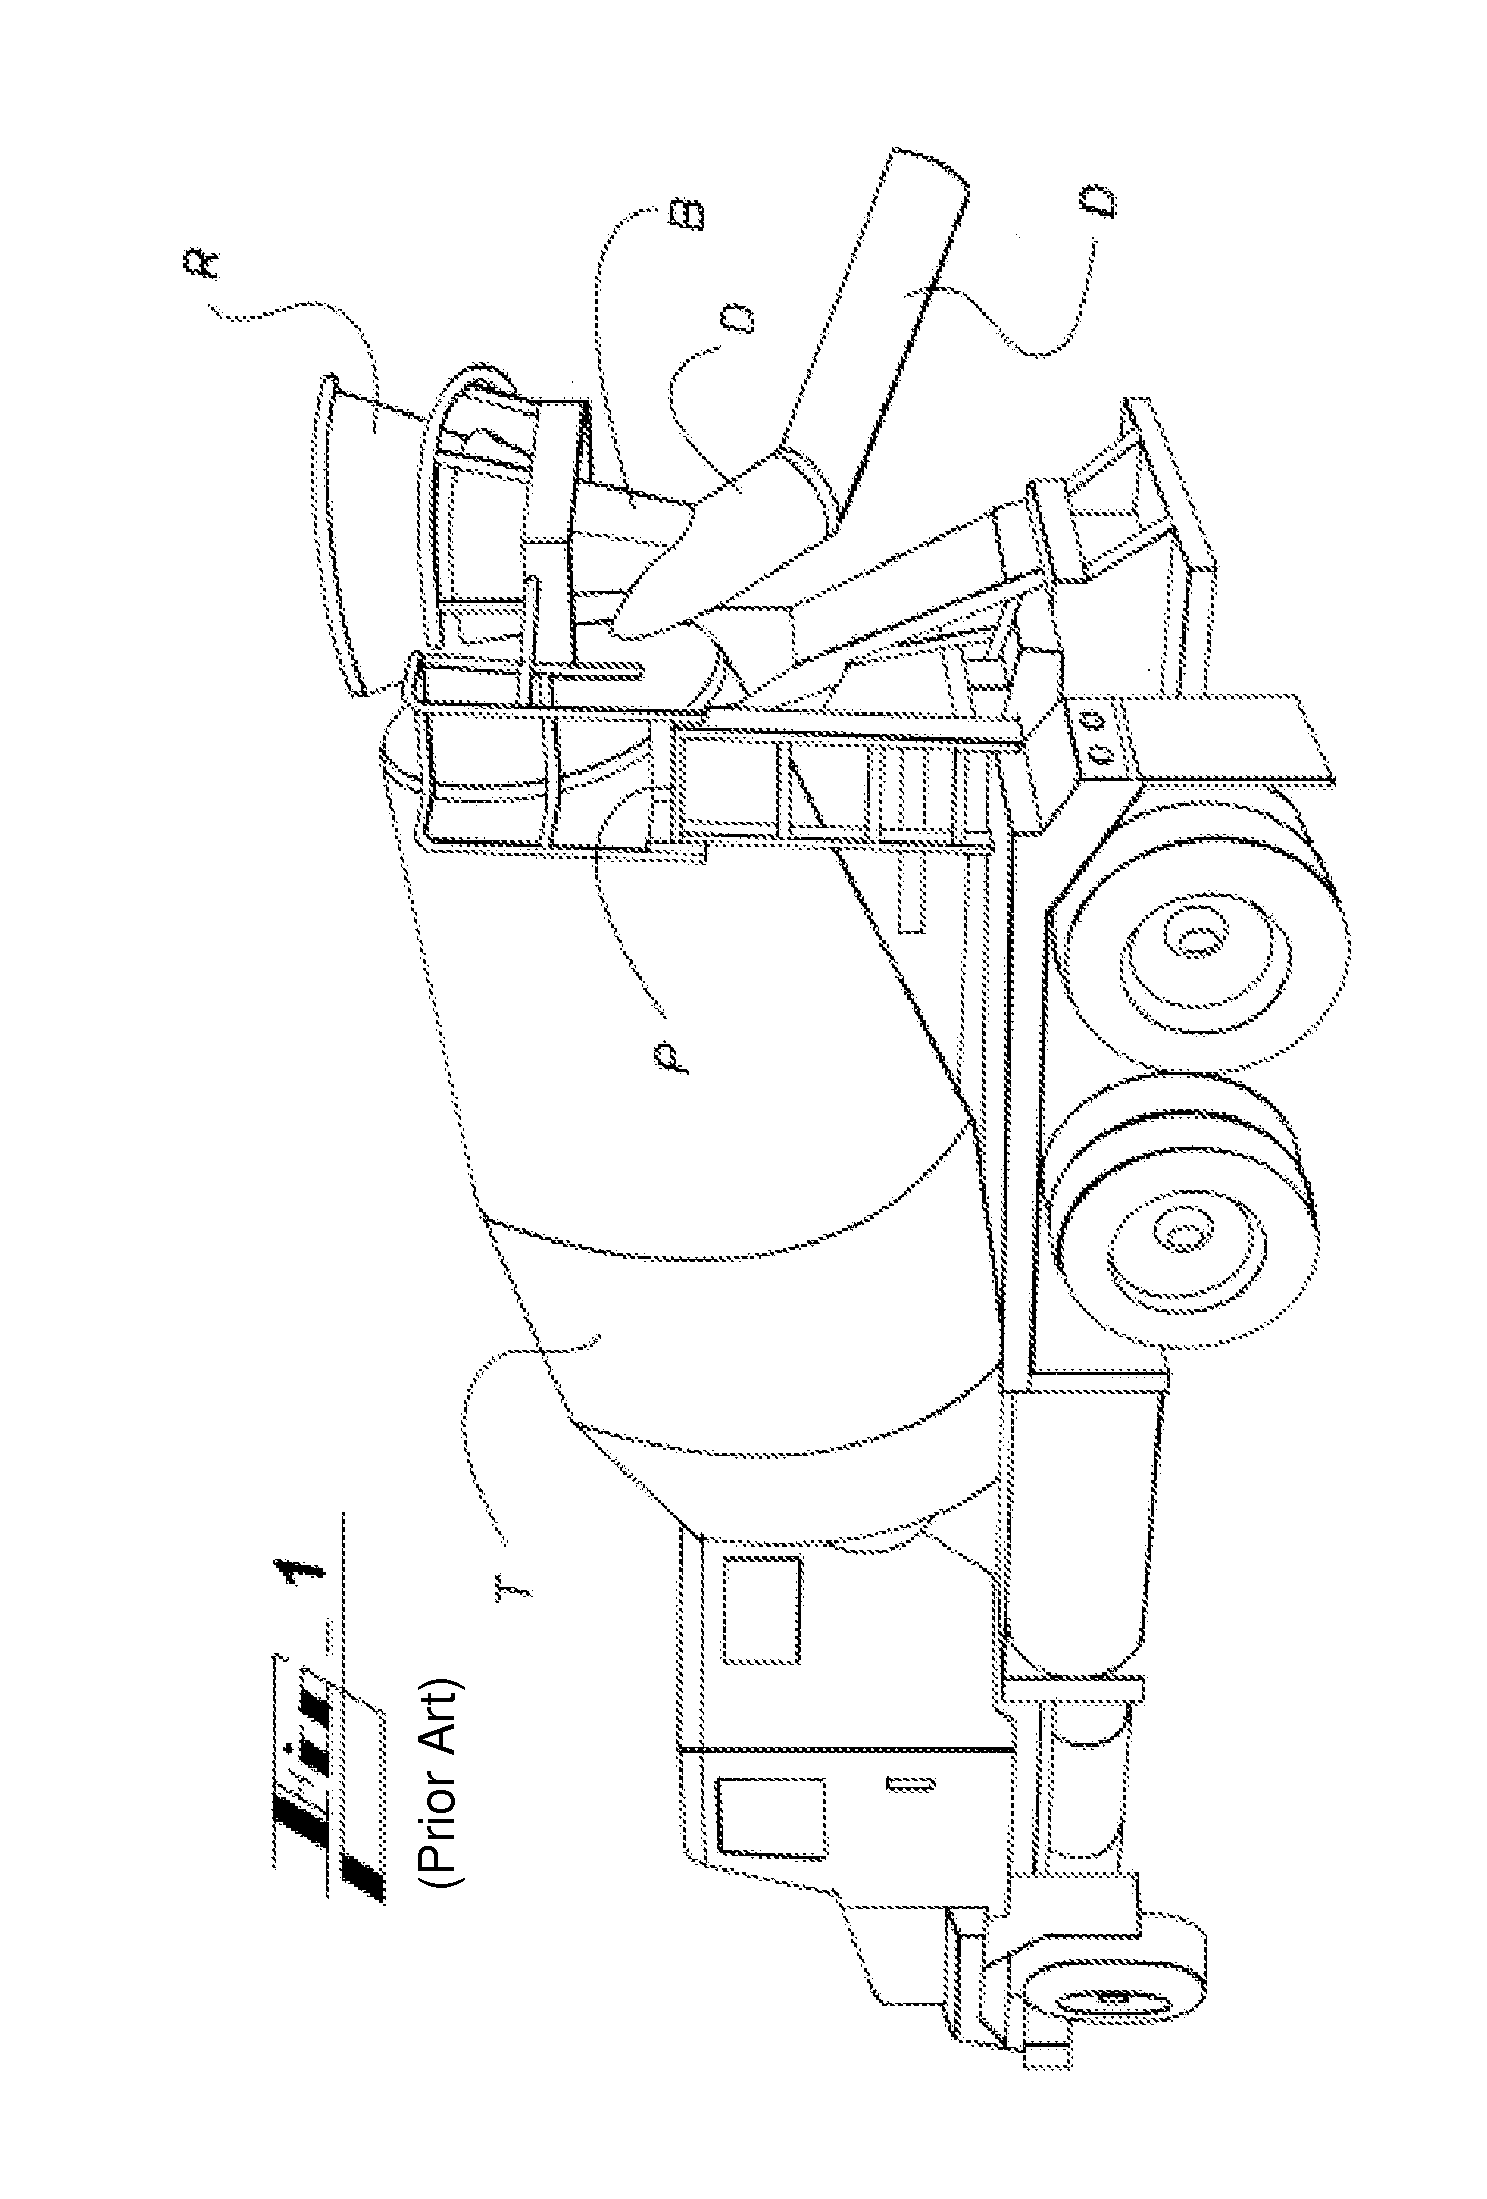 Concrete discharge boot accessory device and method of use thereof